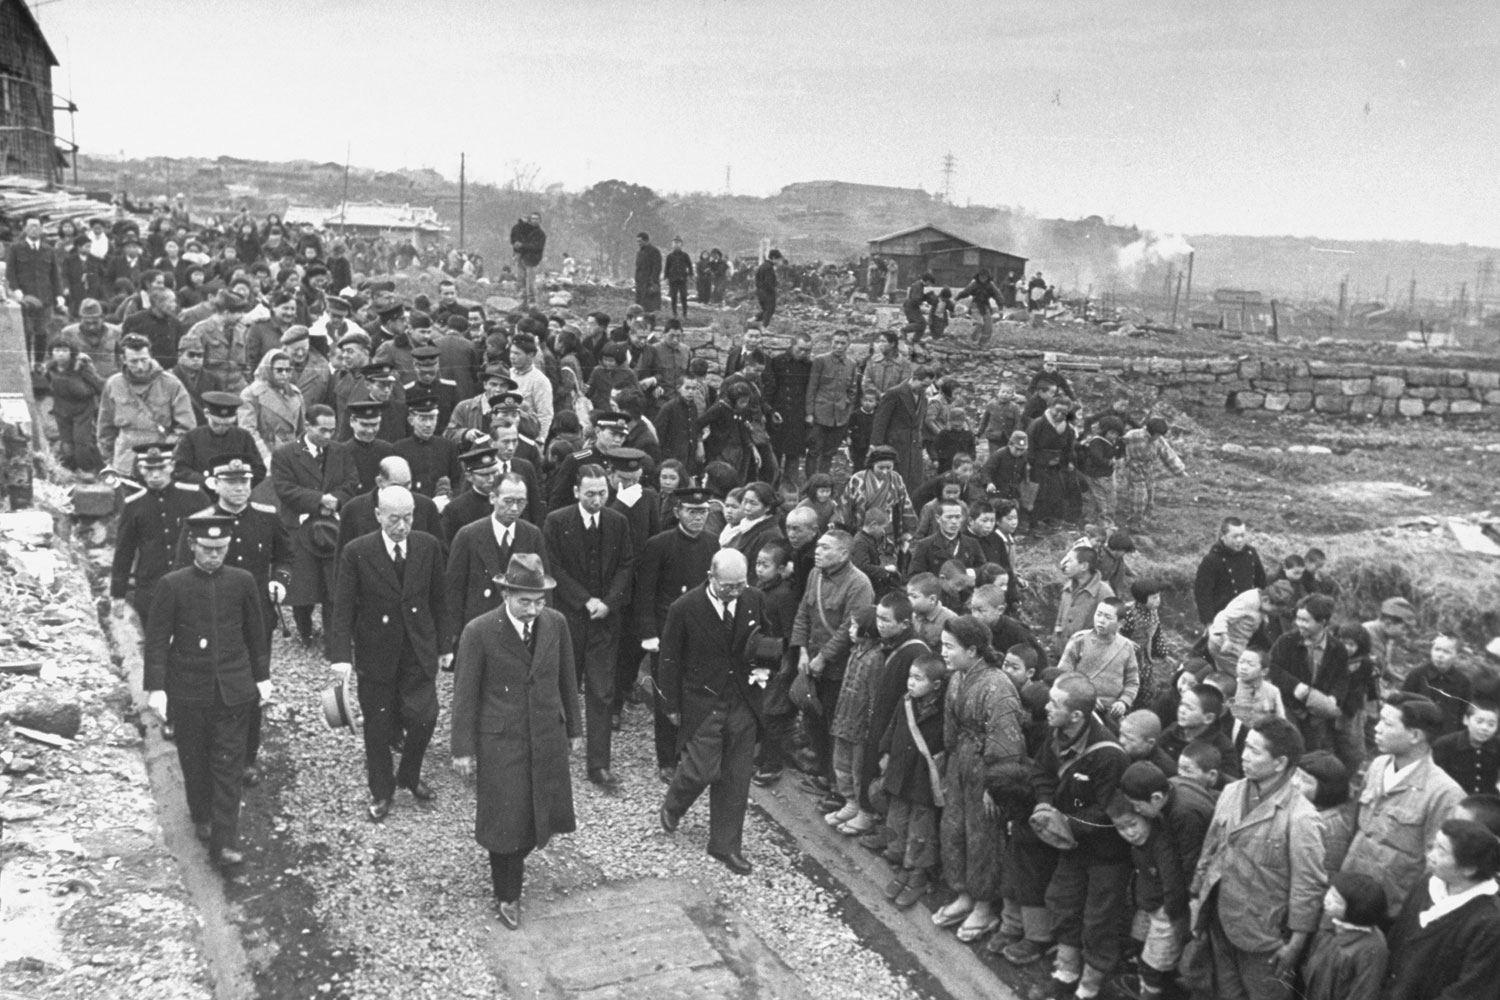 Japan's Emperor Hirohito in Yokohama during his first visit to see living conditions in the country since the end of the war, February 1946.